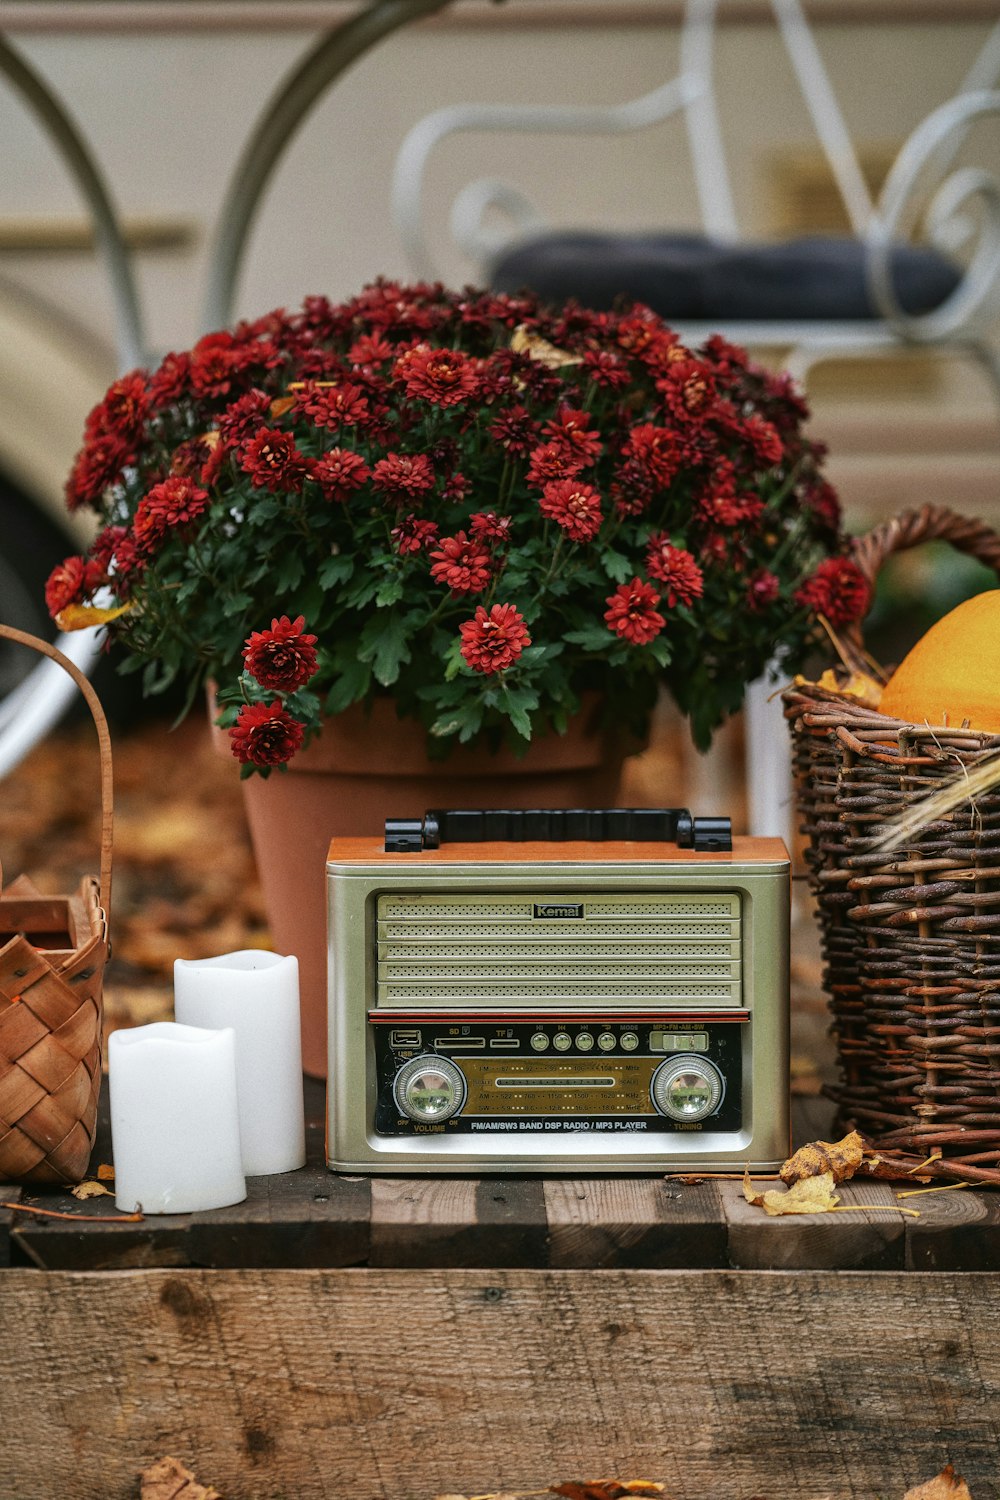 brown and gray radio beside brown wicker basket with red flowers